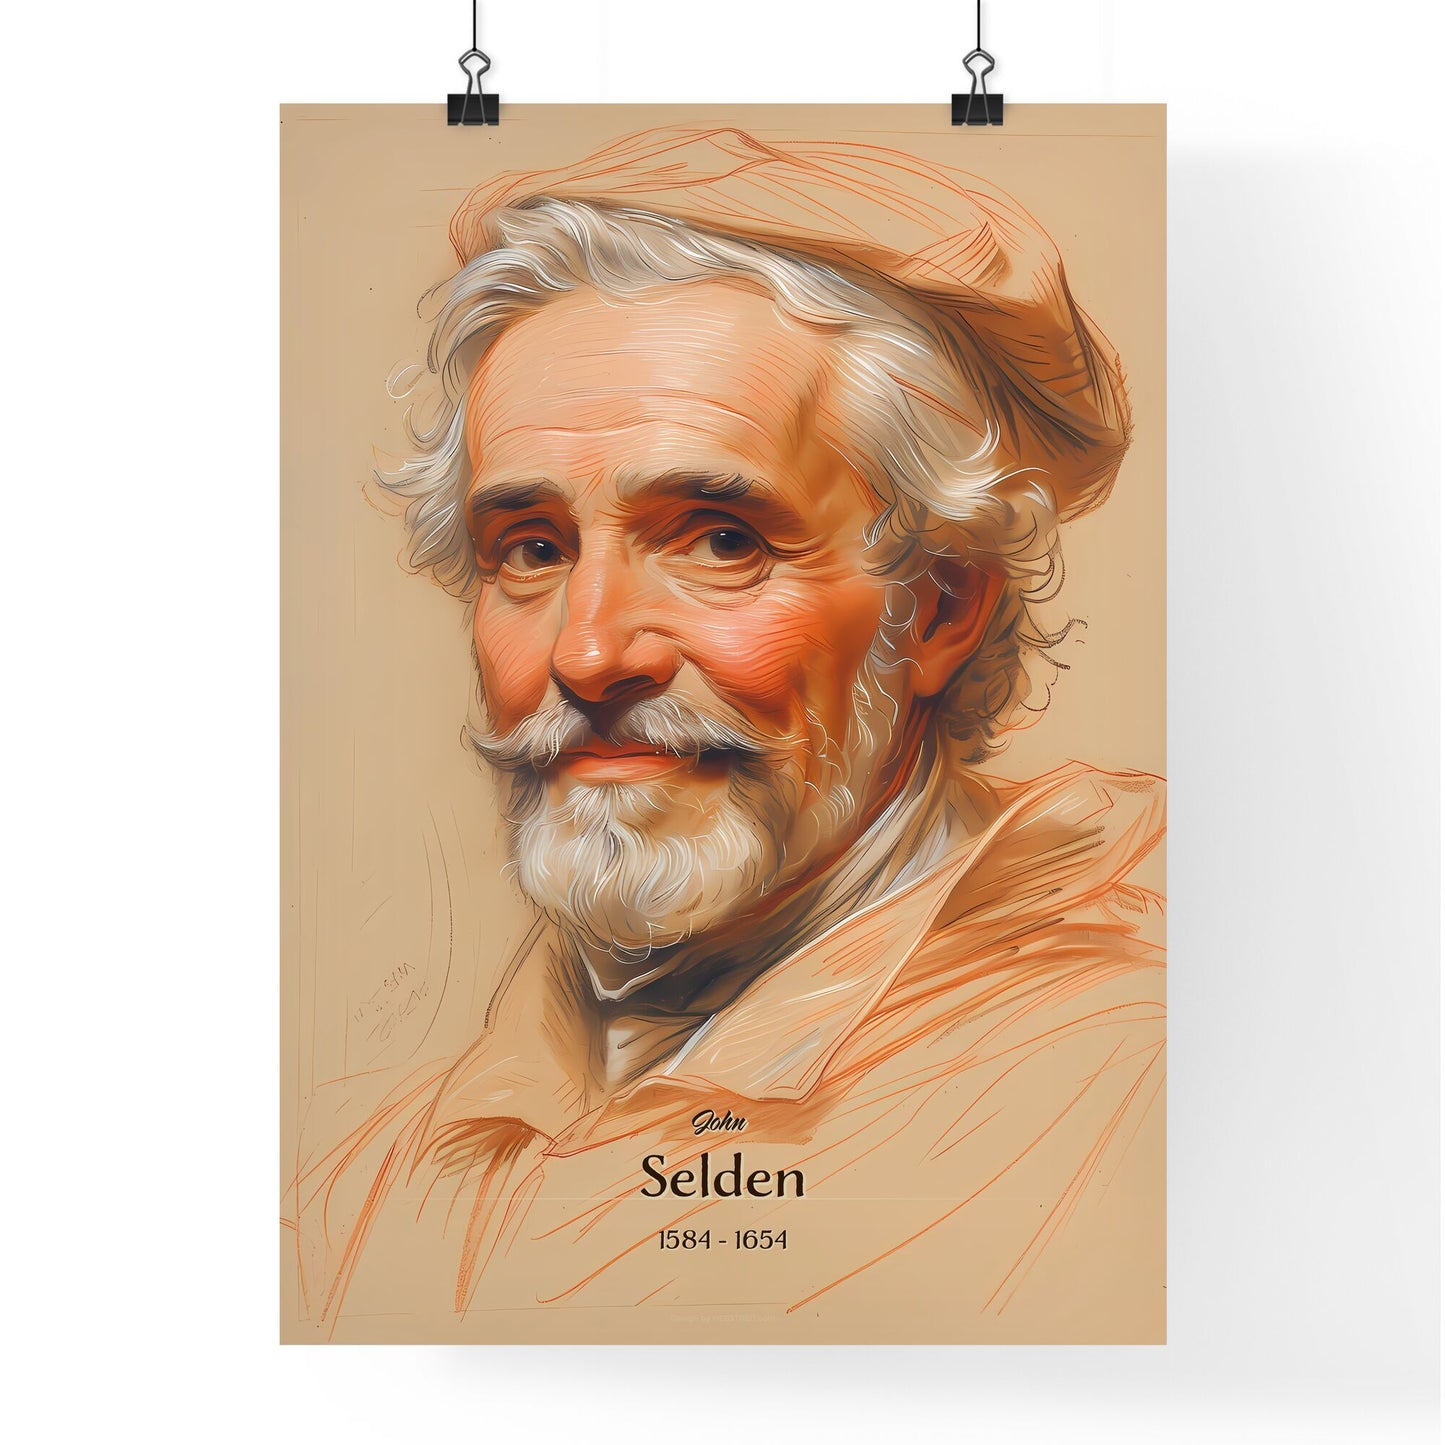 John, Selden, 1584 - 1654, A Poster of a man with a beard and mustache Default Title